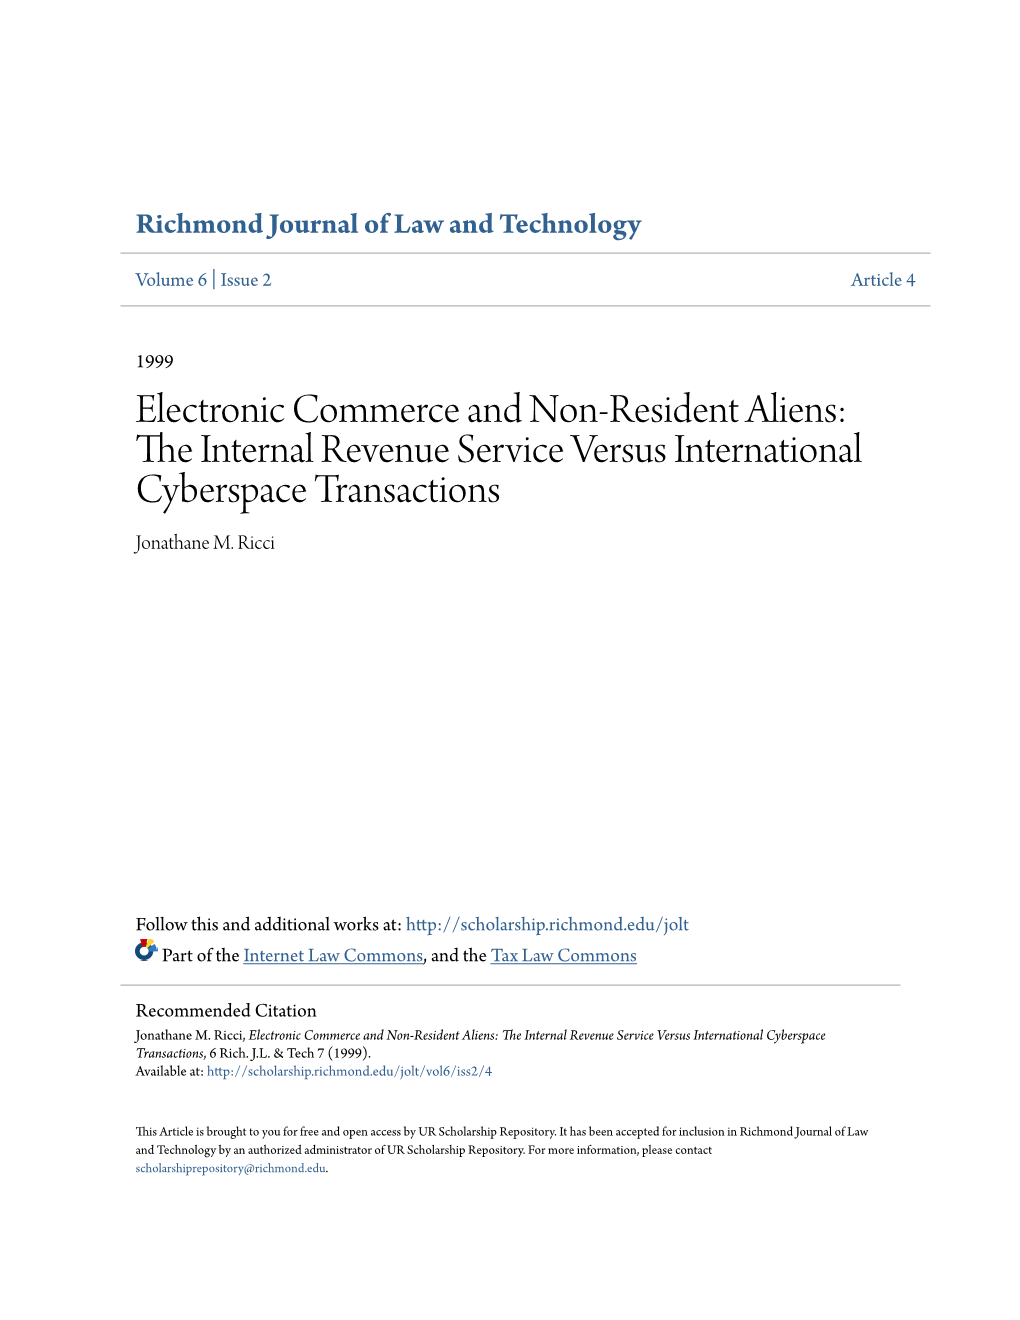 Electronic Commerce and Non-Resident Aliens: the Internal Revenue Service Versus International Cyberspace Transactions, 6 Rich